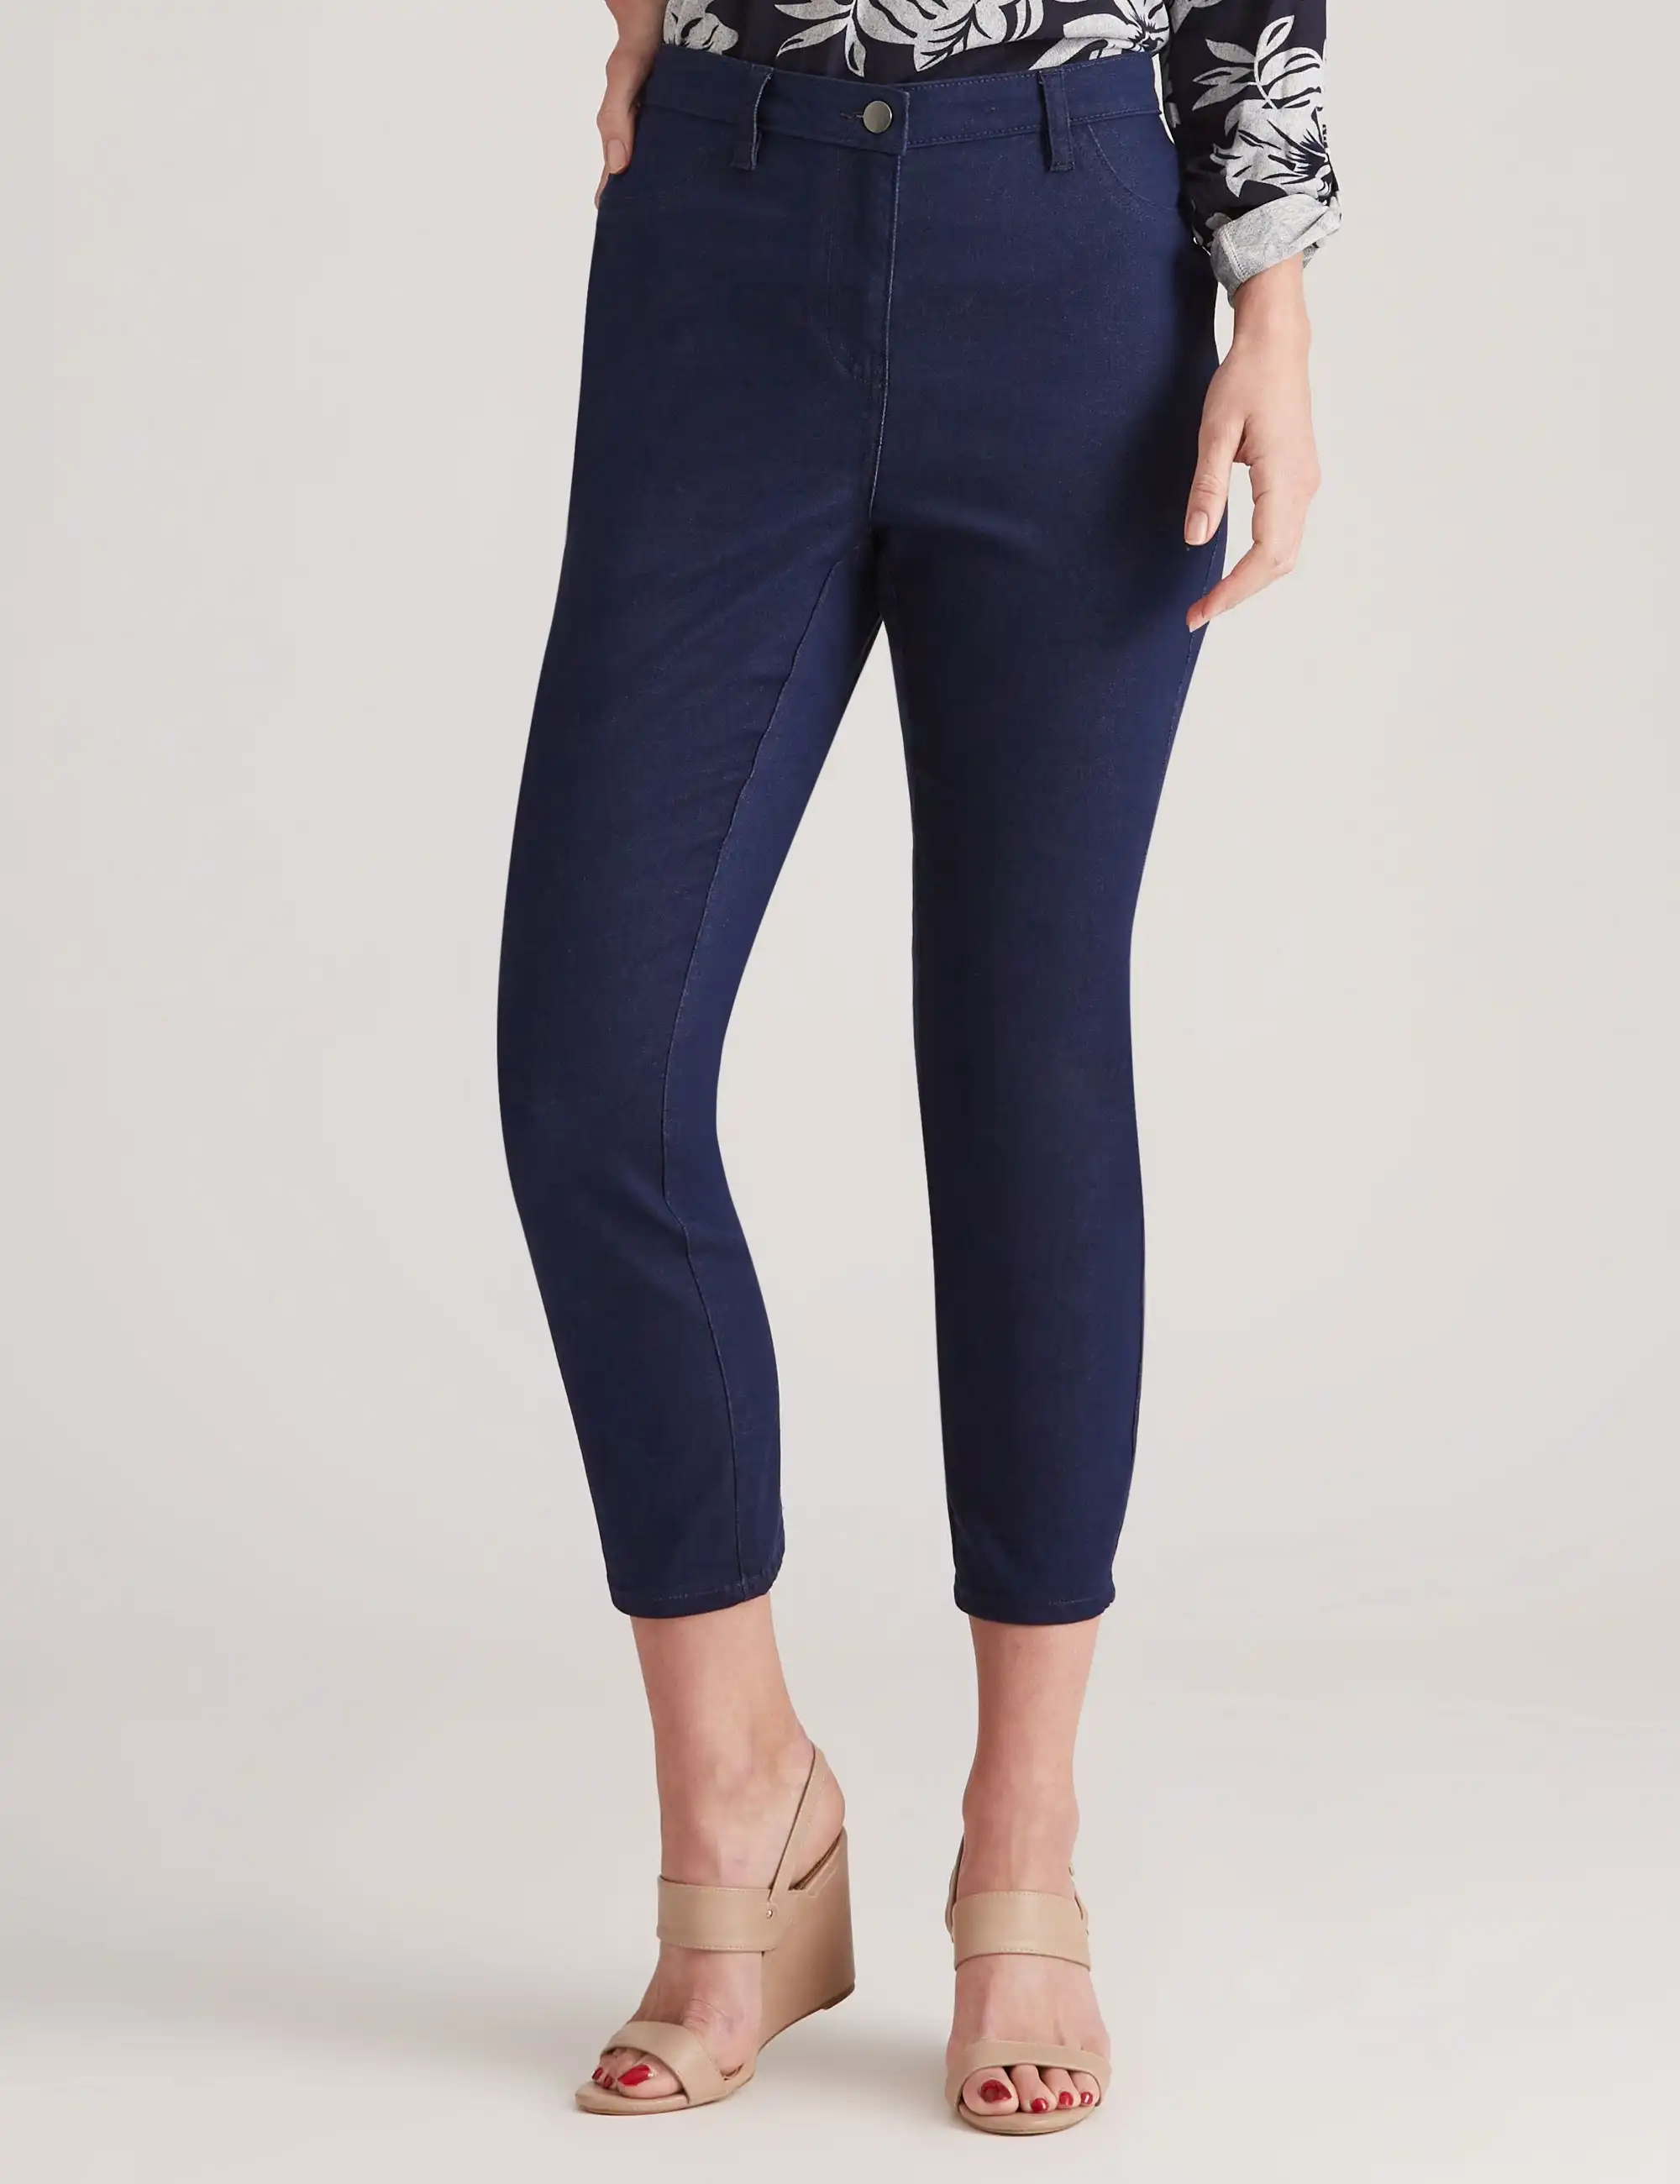 Millers Ale length High-Waist Jeggings